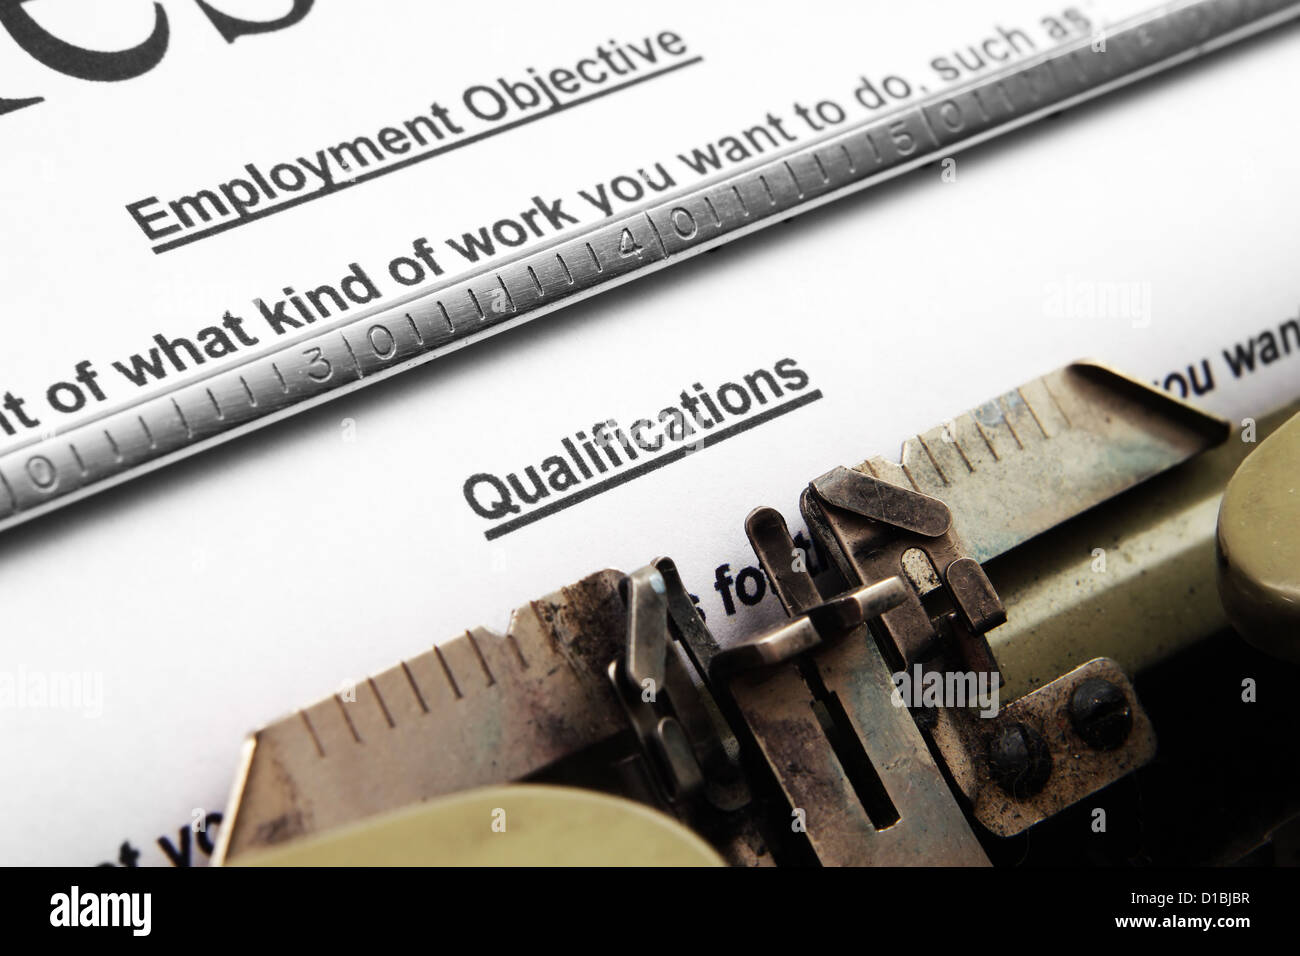 Qualifications text on typing machine Stock Photo